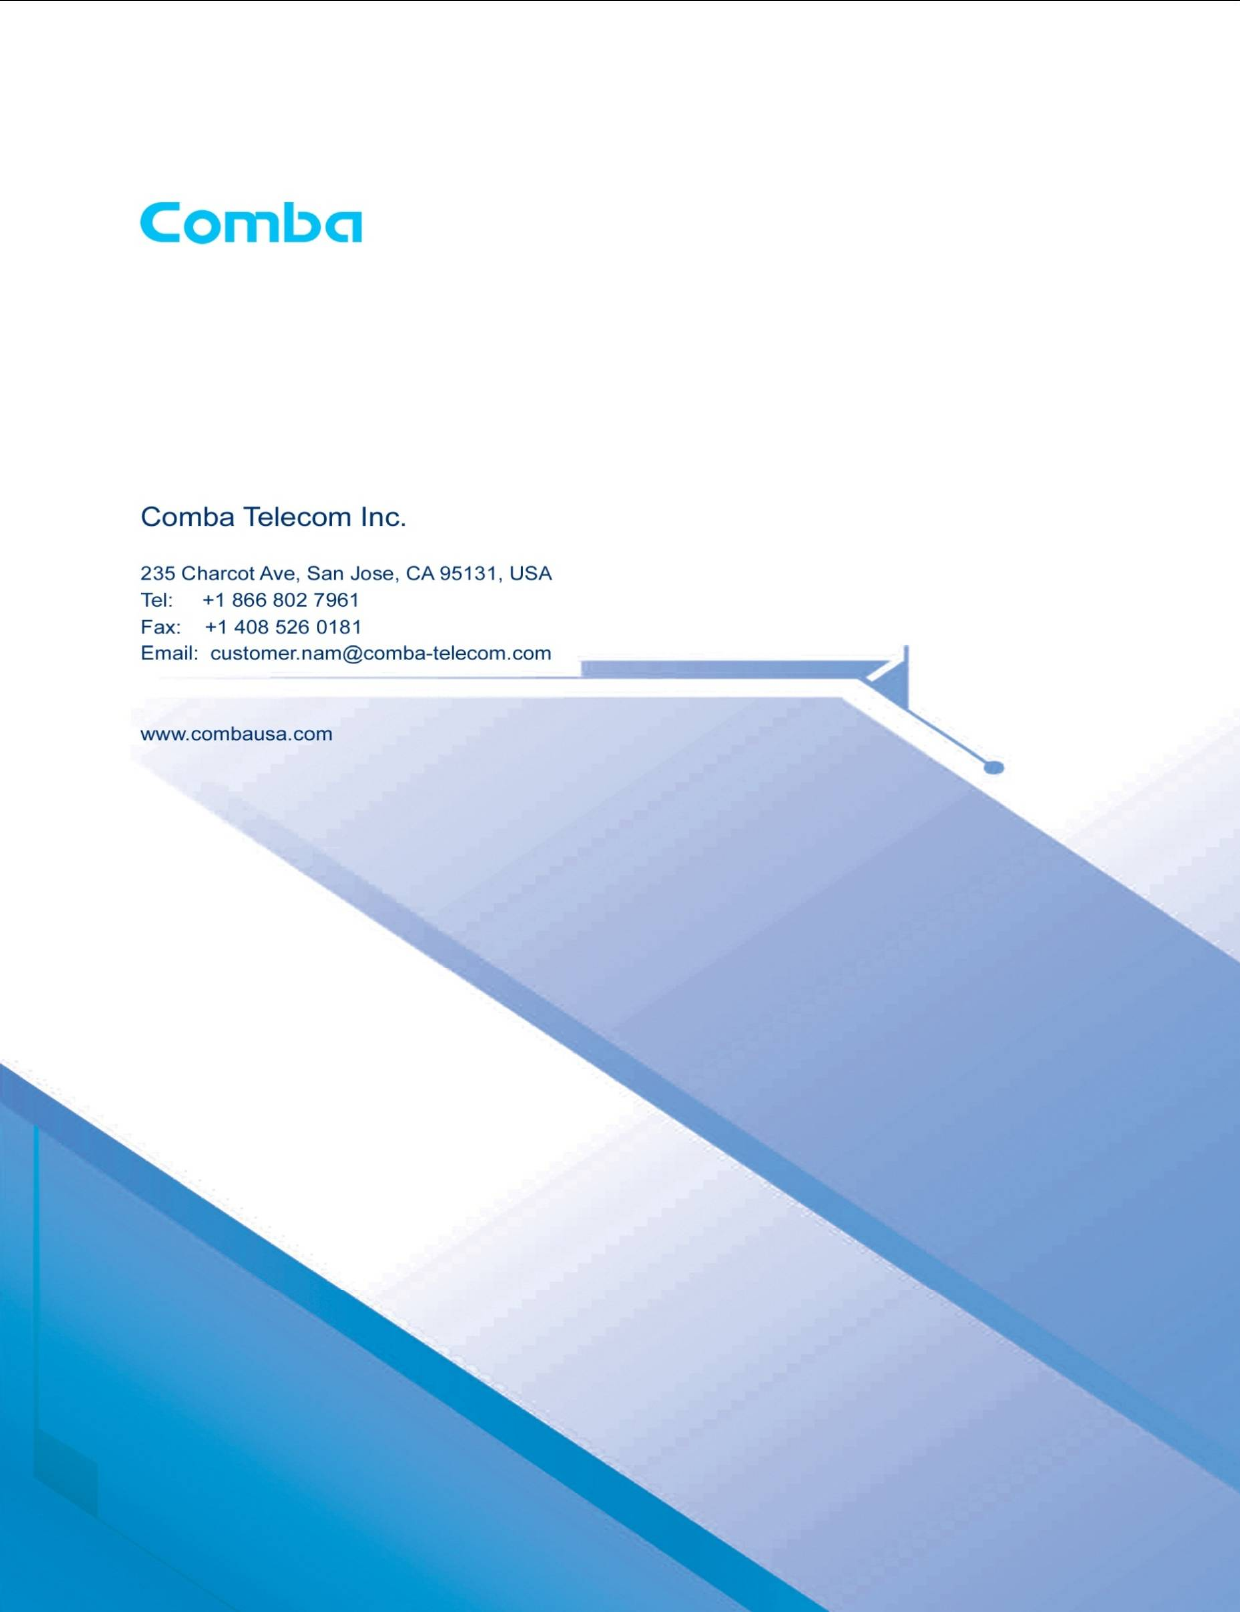 USER MANUAL FOR COMFLEX-6Q00 5W  ENU STATUS: 1-0-1  Copyright - refer to title page  Page 68          